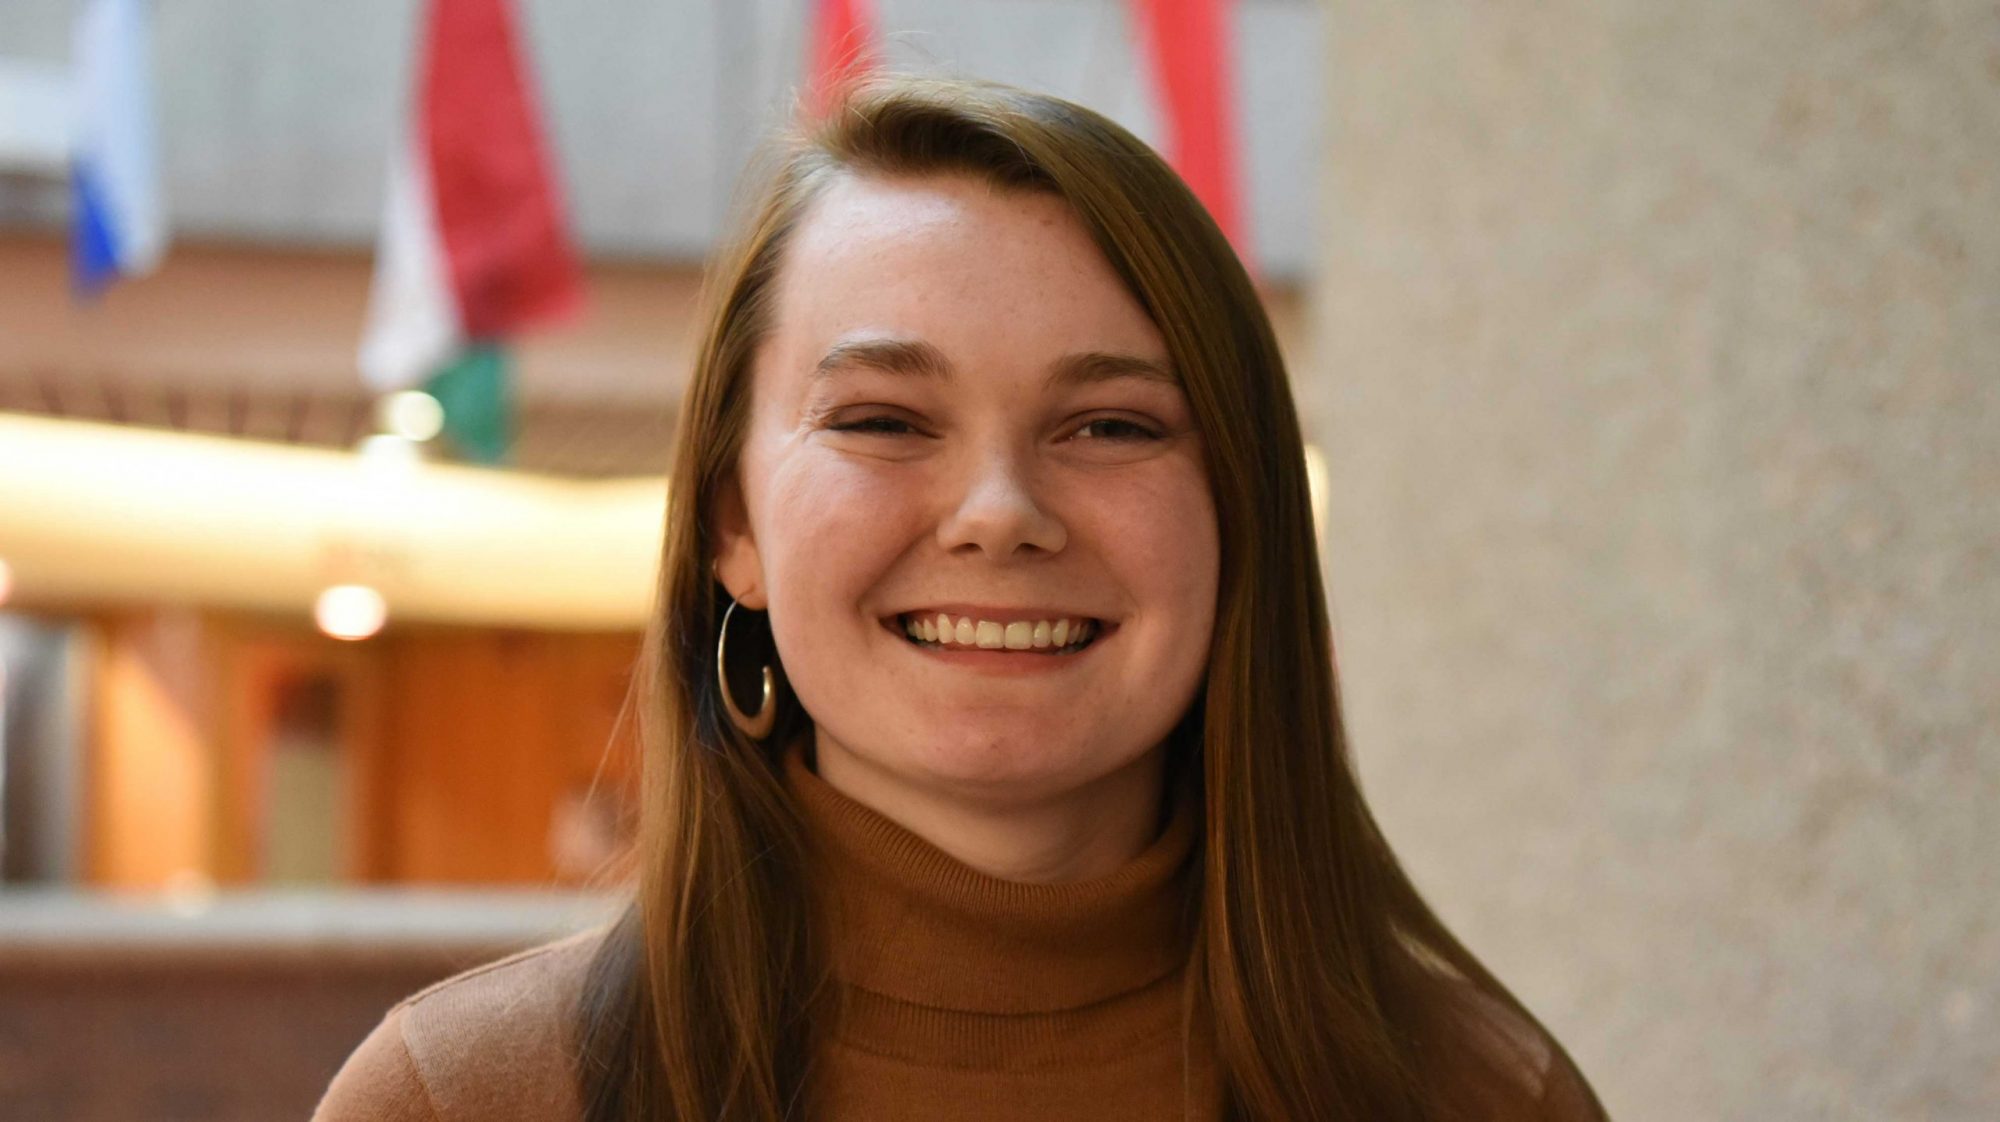 UofL student Tessa Chilton headshot. She's wearing a brown turtleneck and standing in the CoB atrium.